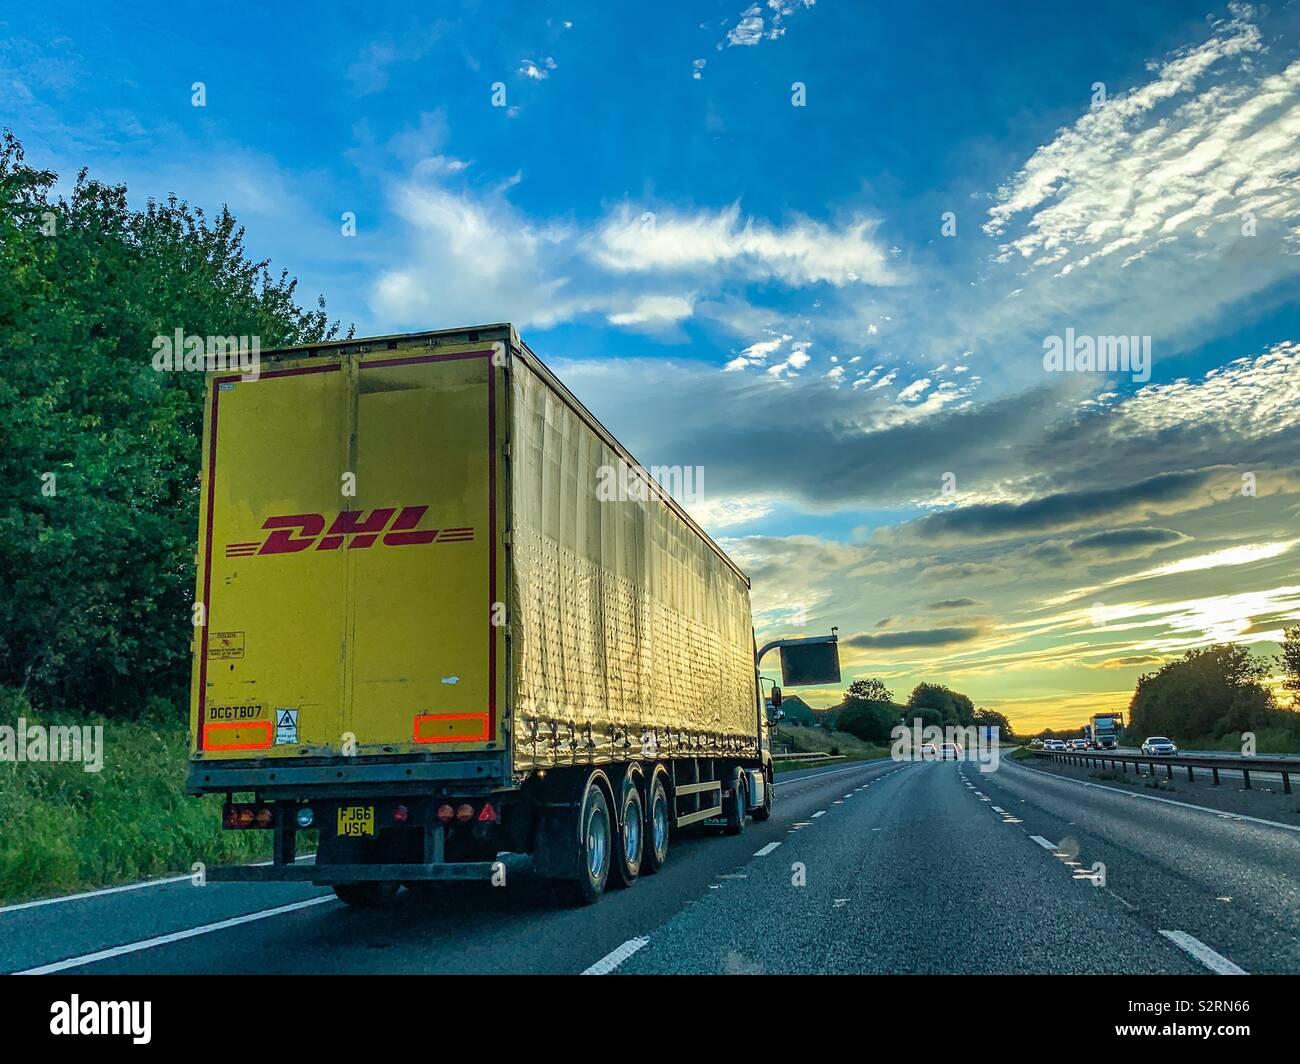 DHL HGV lorry on M62 motorway in Leeds Stock Photo